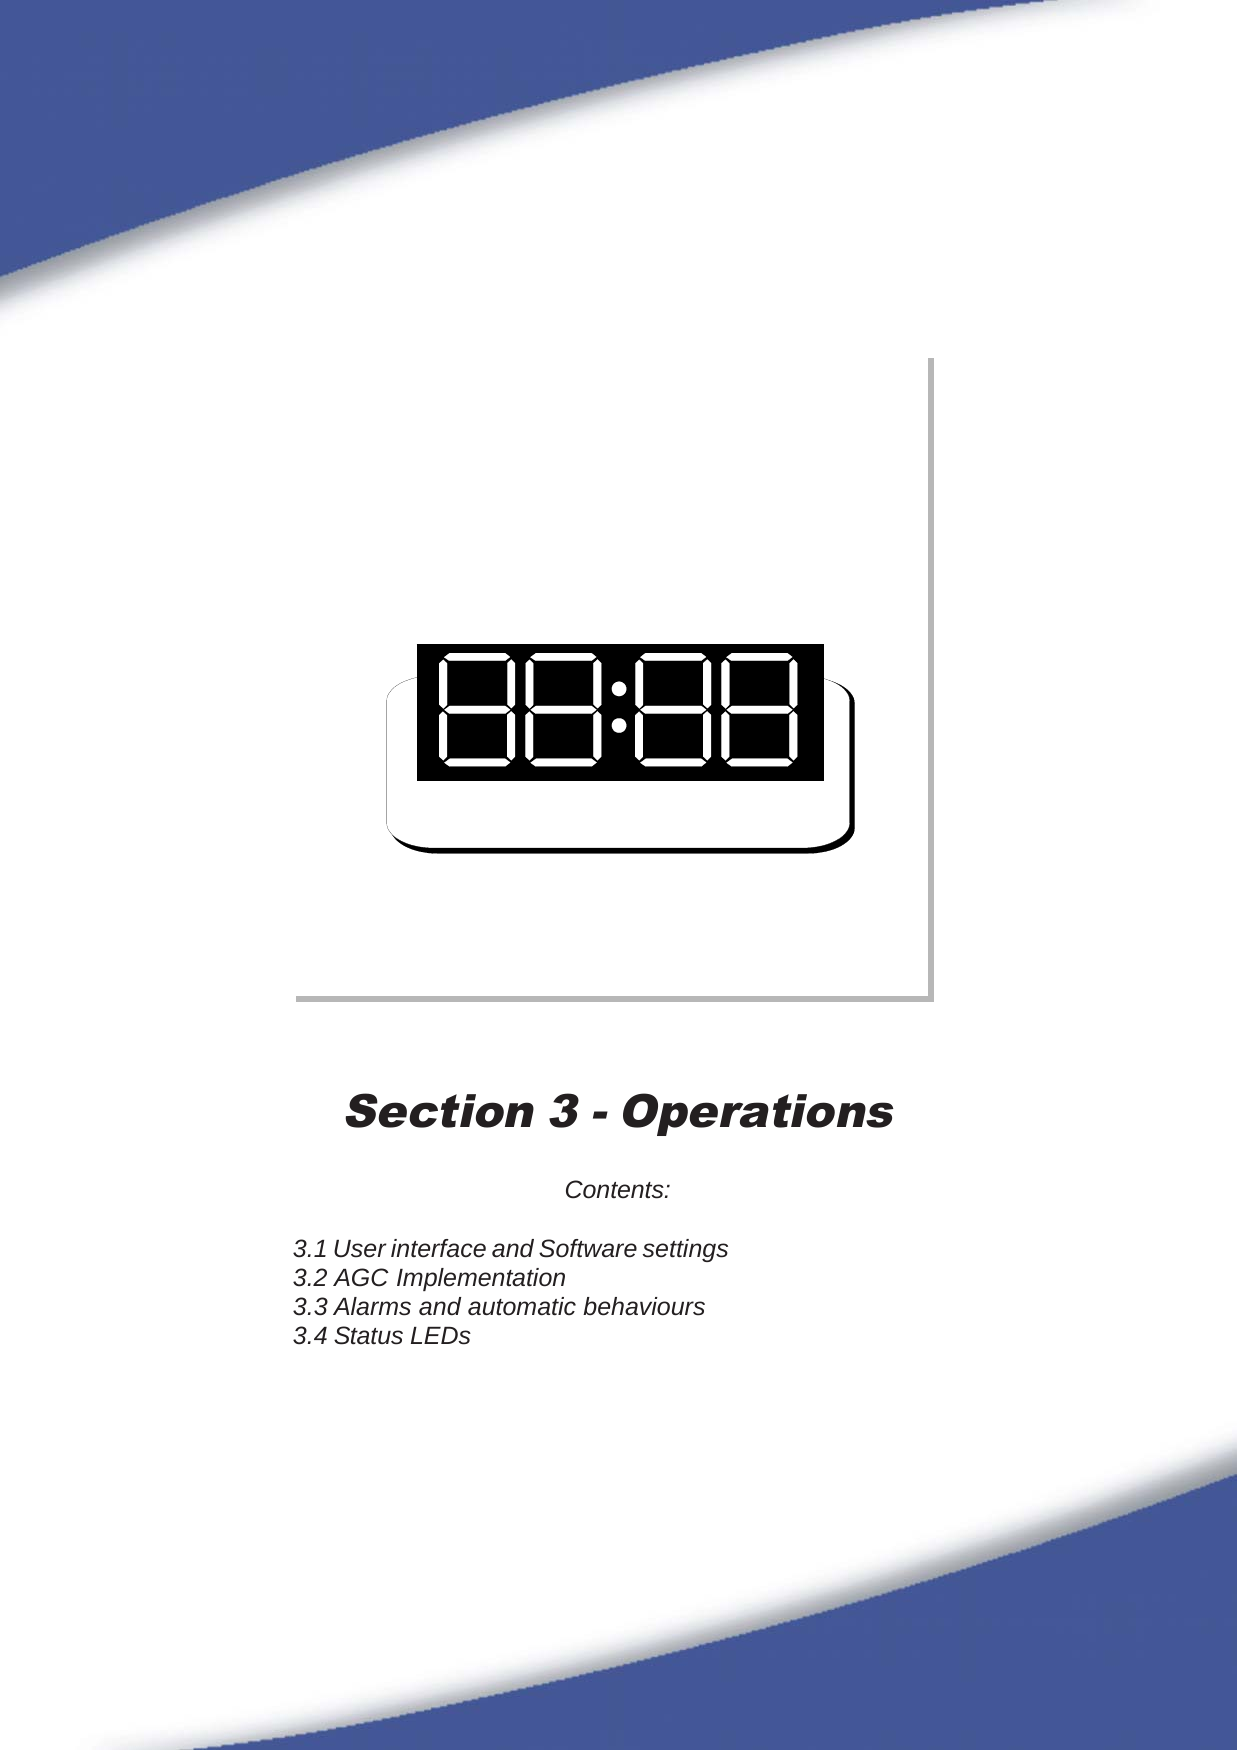 29Section 3 - OperationsContents:3.1 User interface and Software settings3.2 AGC Implementation3.3 Alarms and automatic behaviours3.4 Status LEDs